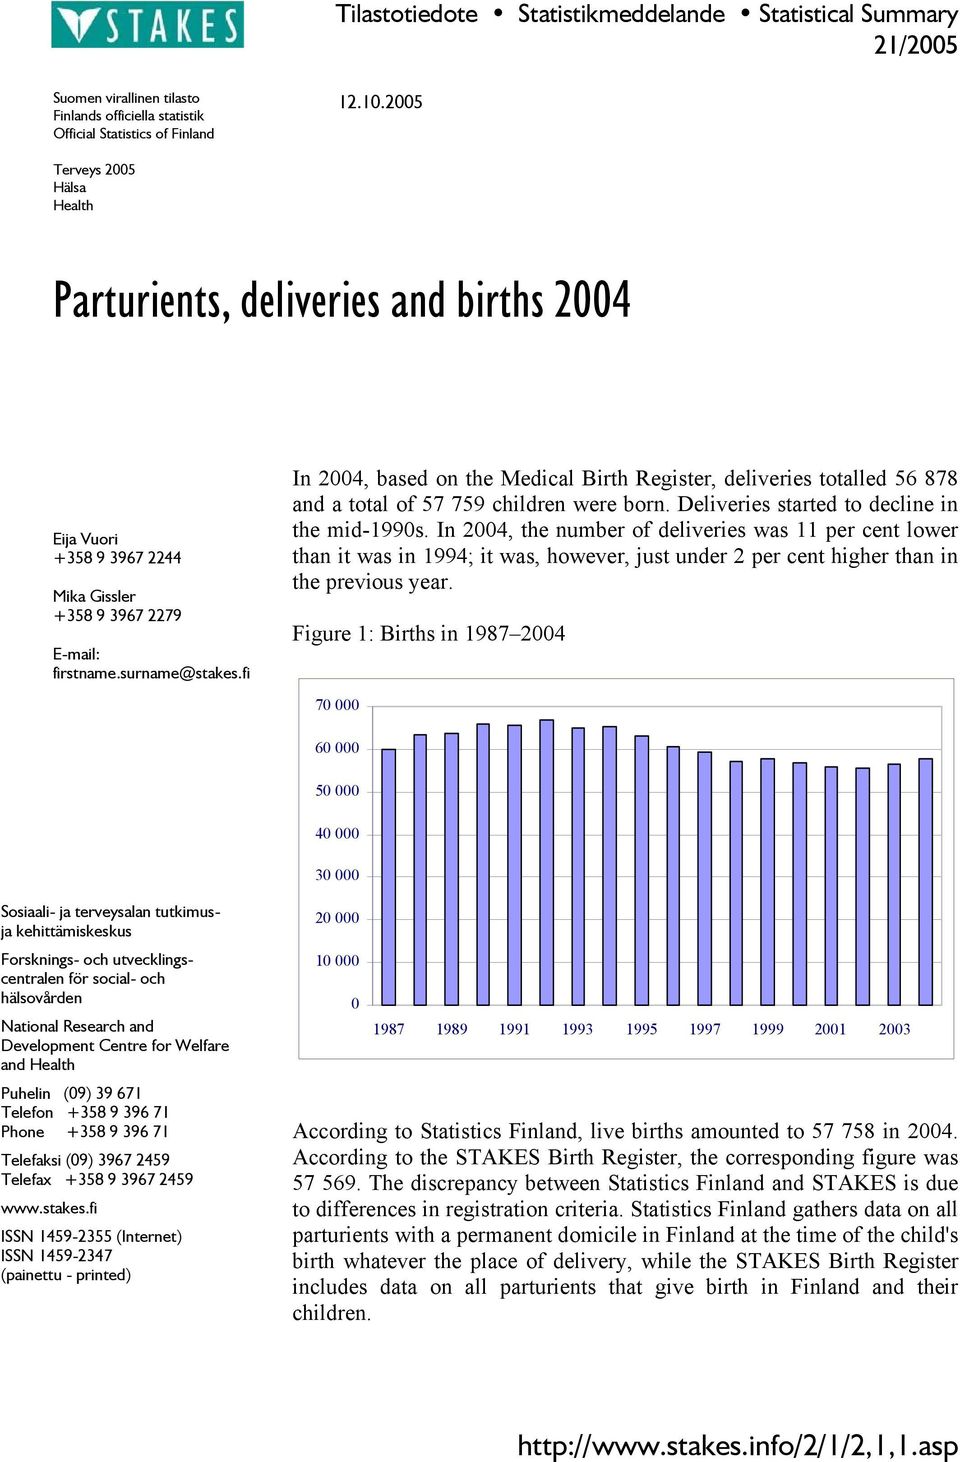 fi In 2004, based on the Medical Birth Register, deliveries totalled 56 878 and a total of 57 759 children were born. Deliveries started to decline in the mid-1990s.